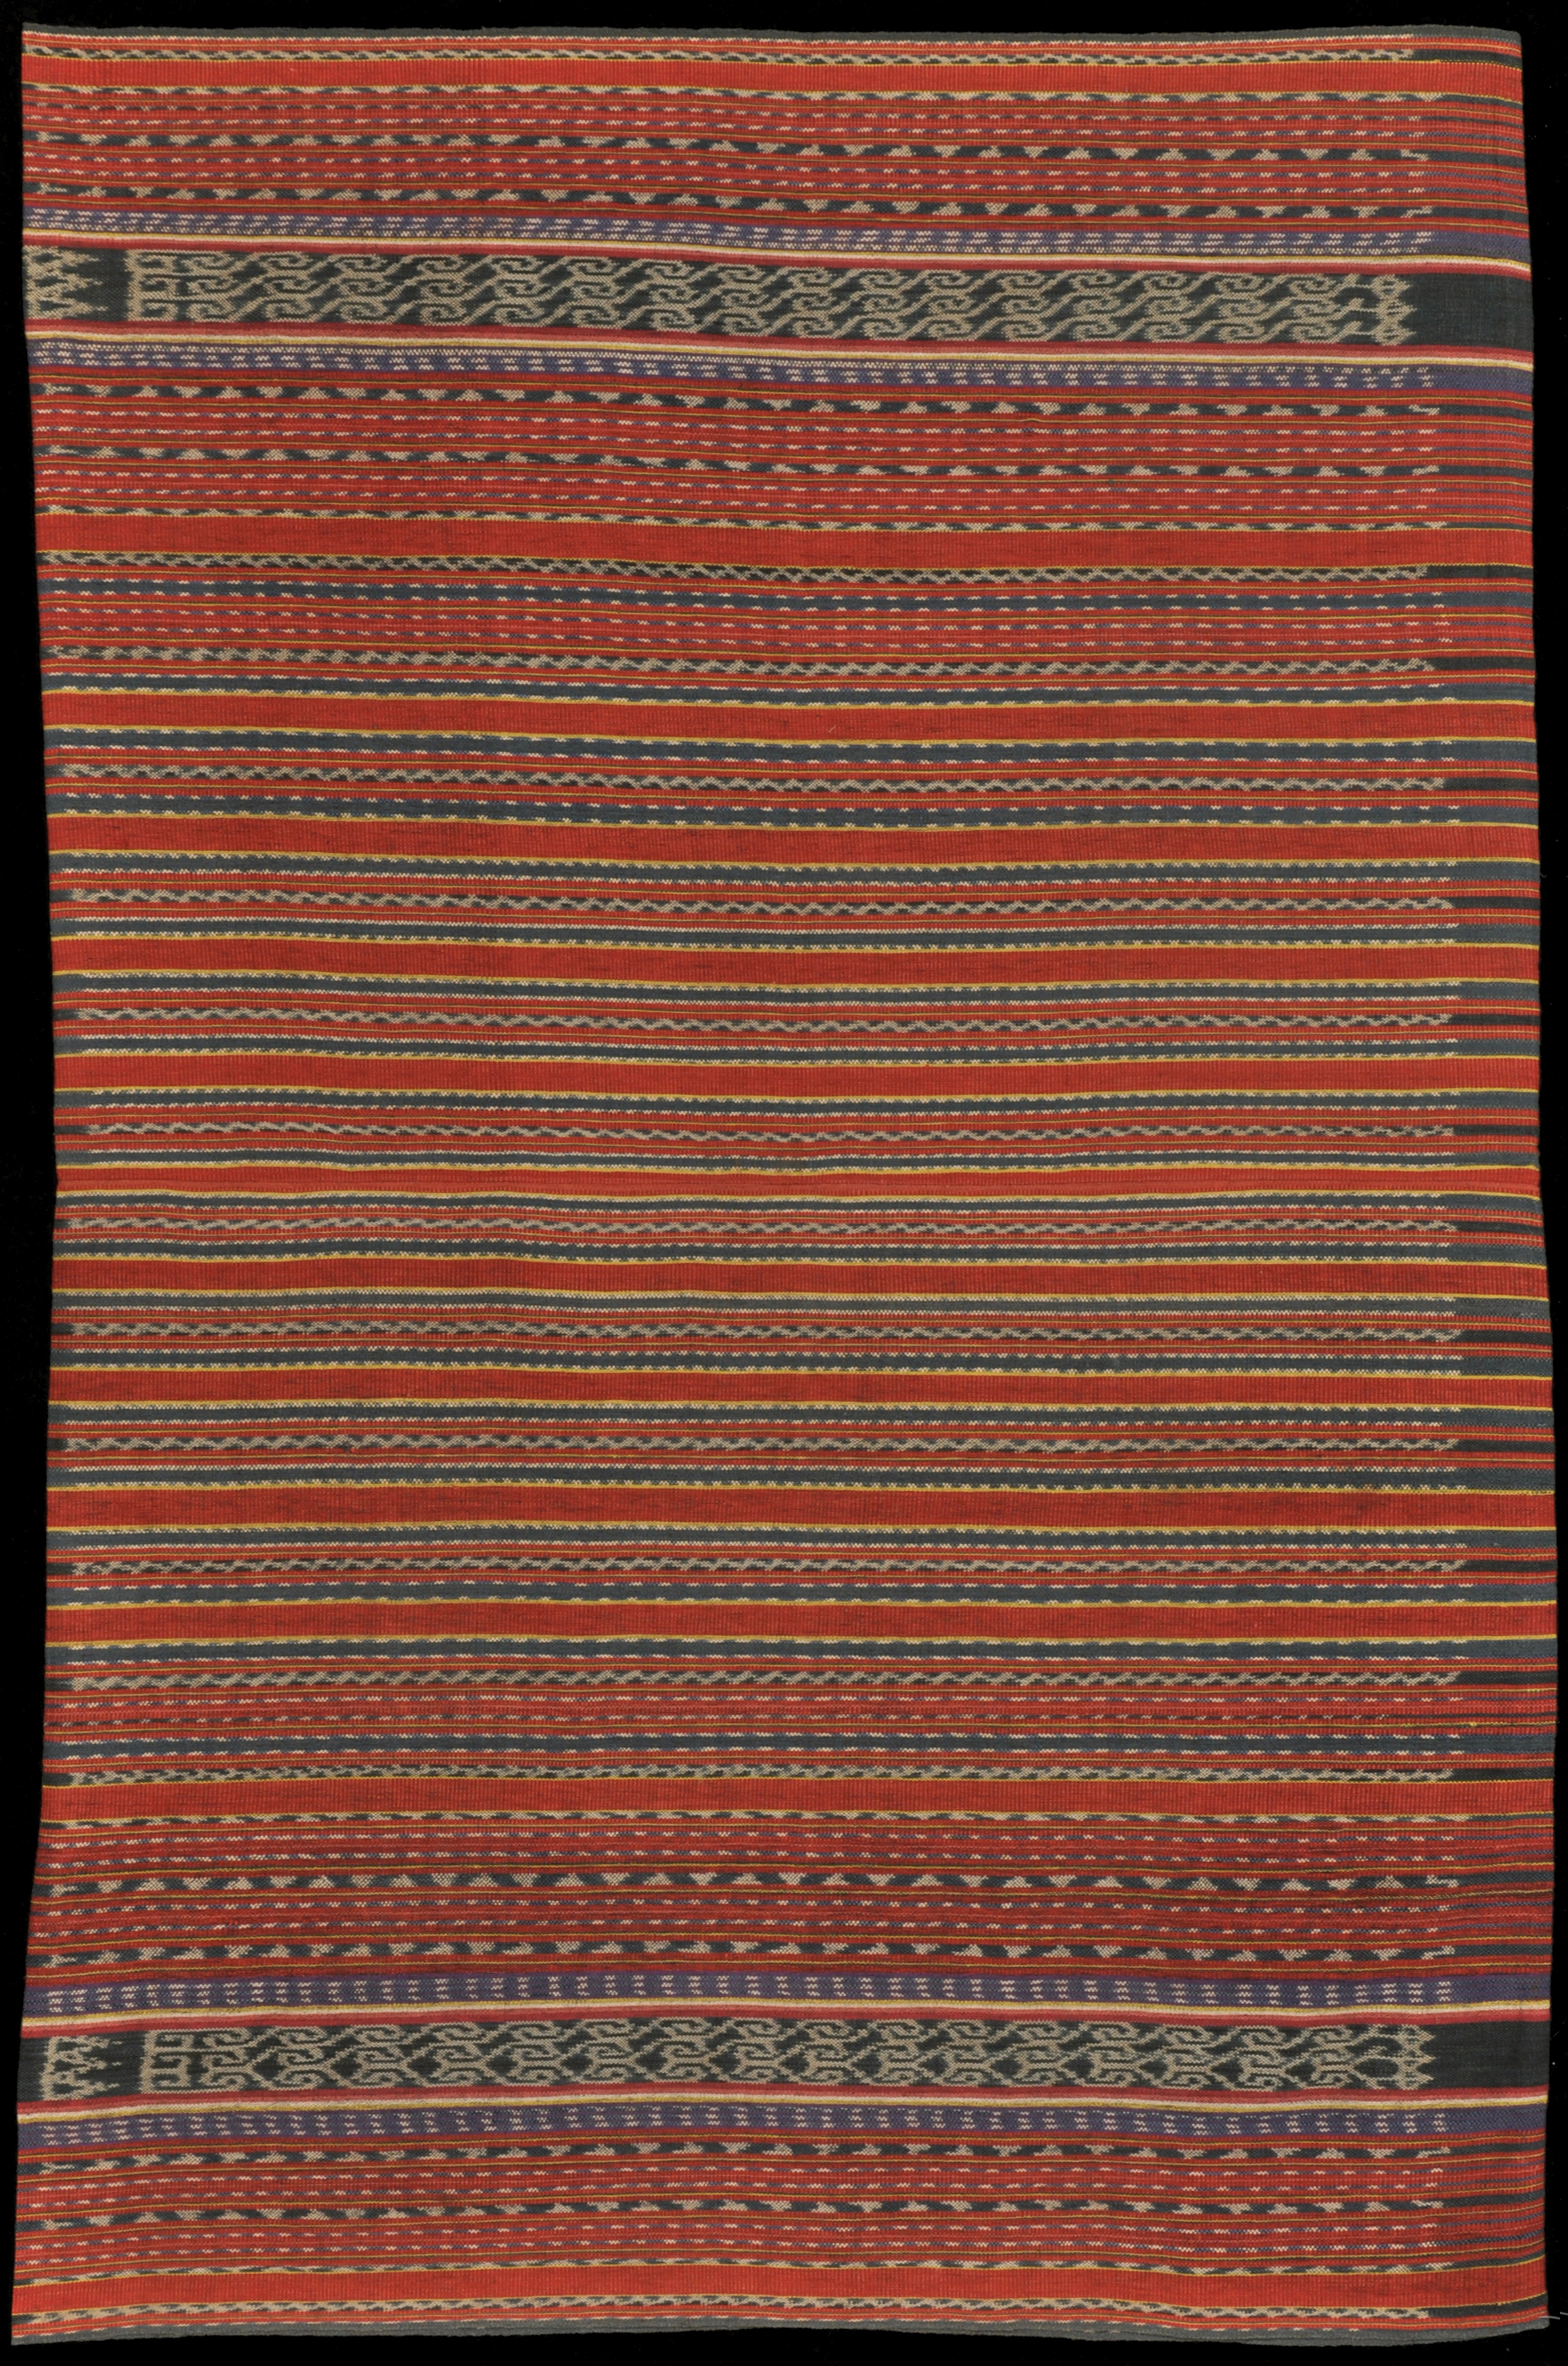 Ikat from Lakor, Moluccas, Indonesia